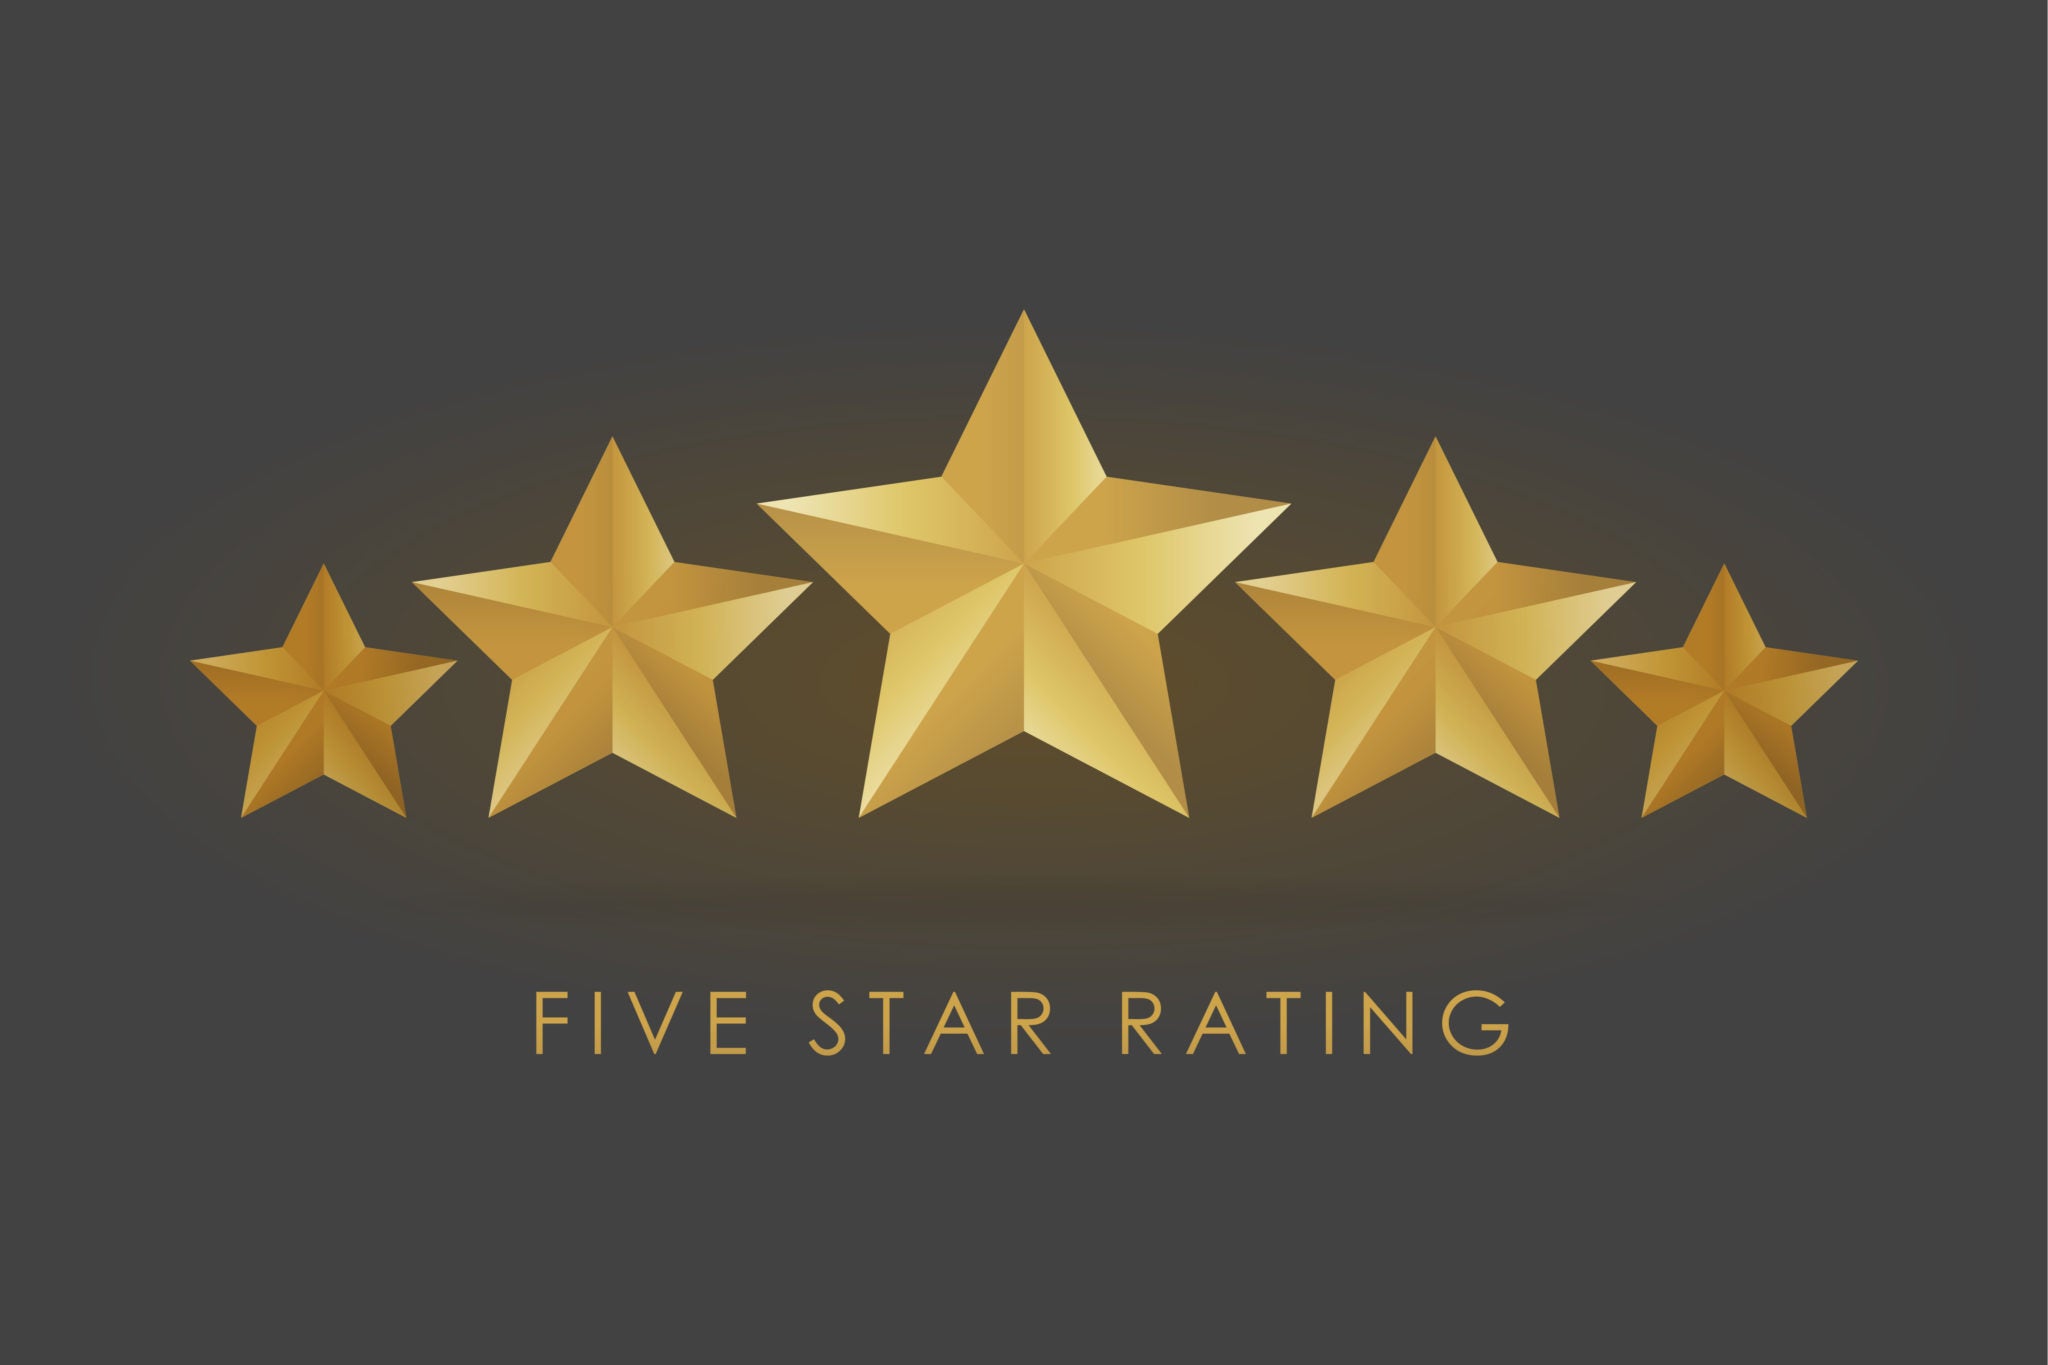 Client Consultations for FIVE Star Reviews